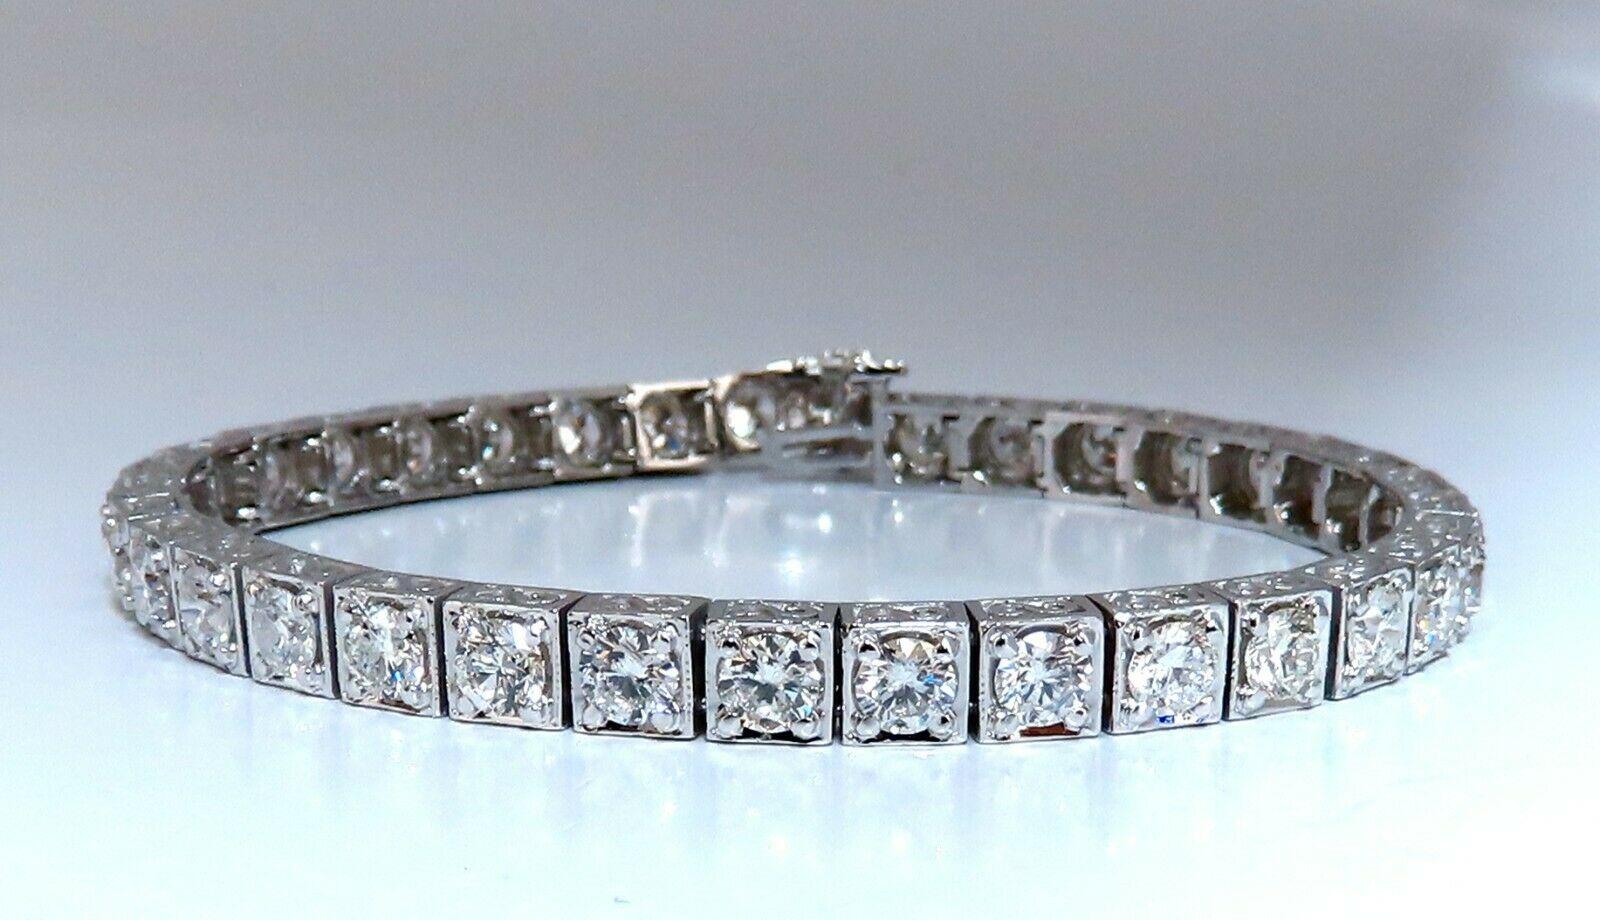 Classic Tennis / Squared Box Bead Set

8.42ct. Natural  diamonds bracelet.

Round, full cuts 

G color / Si-1 clarity.

14kt. white gold 

20.4 Grams.

Width of bracelet: 5.2mm

7.25  inch wearable length

safety clasp/ snap lock

$48,000 Appraisal